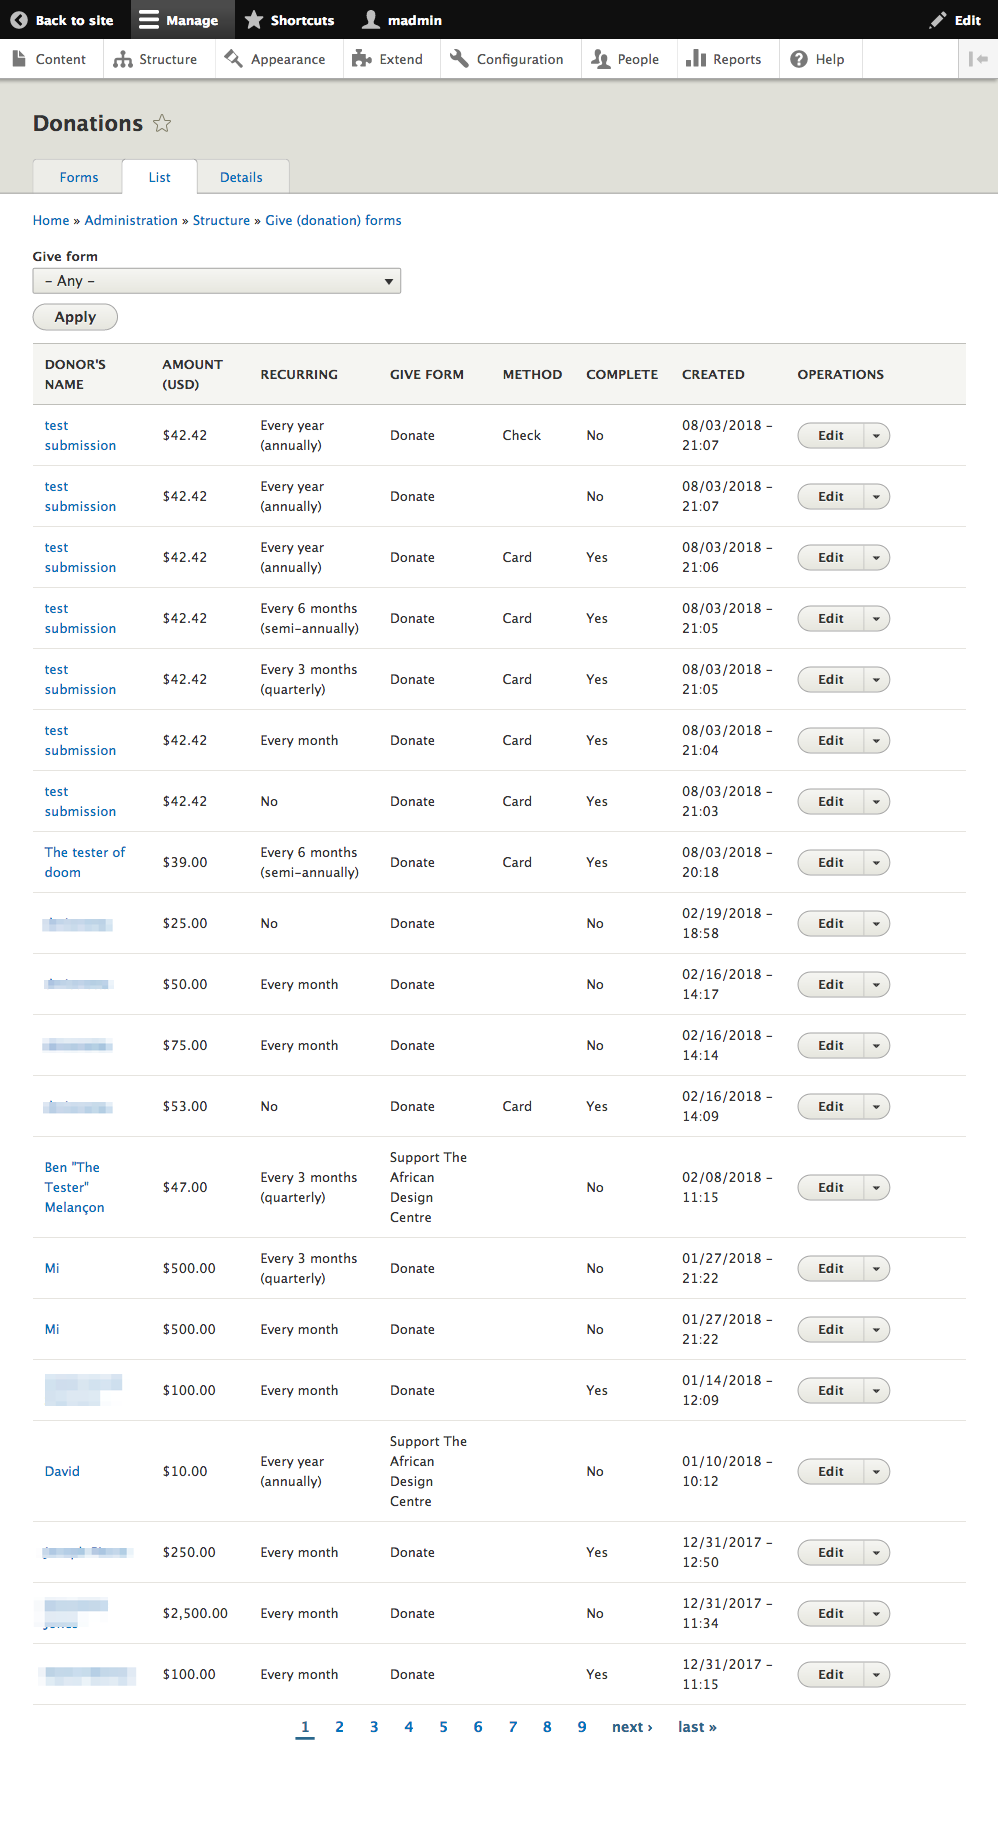 List of donations on the site.